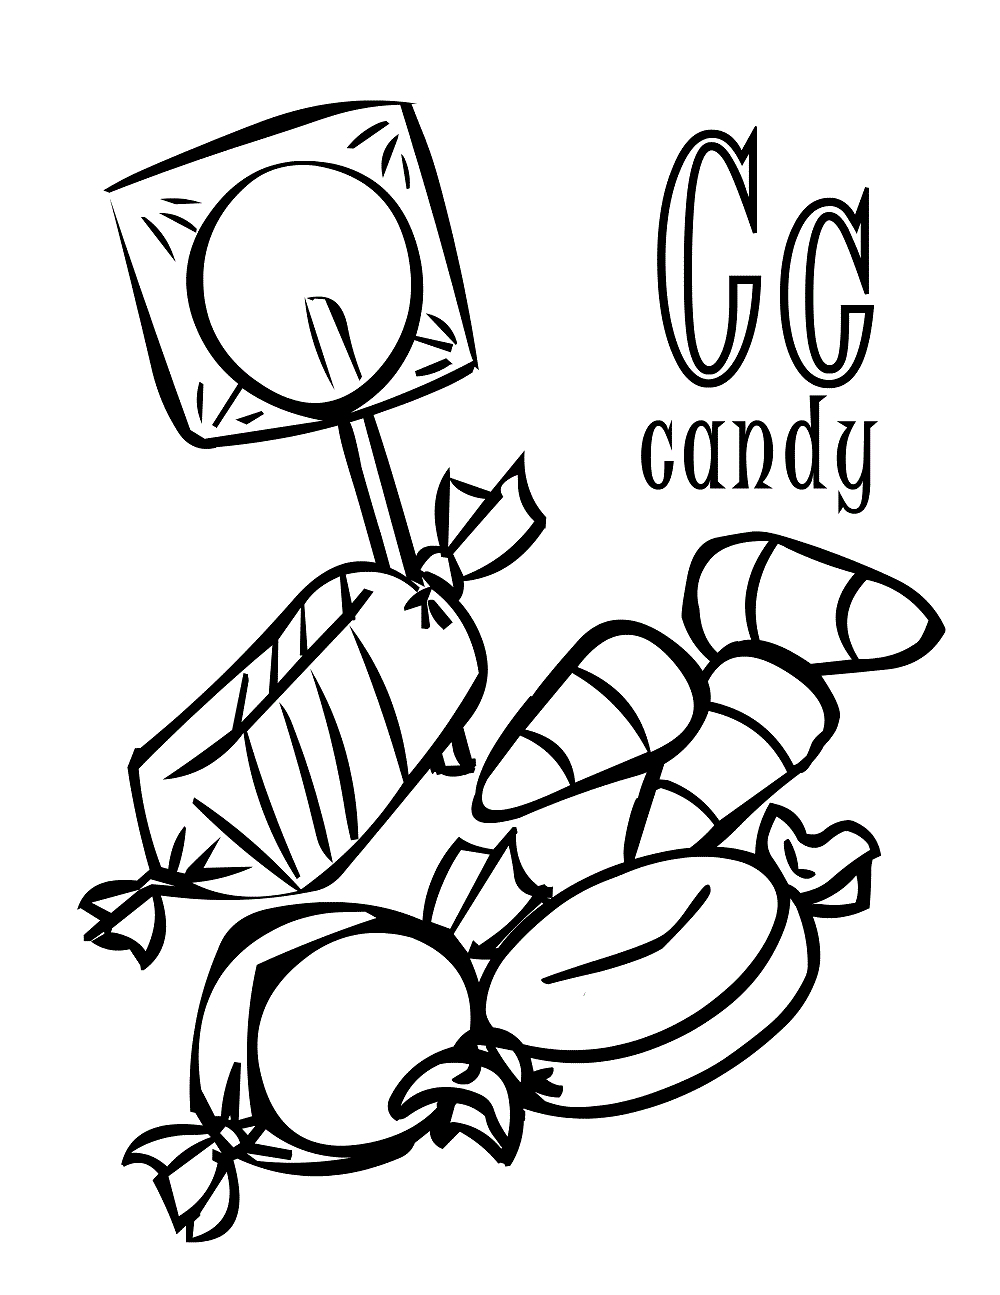 Candyland Characters Coloring Pages Candyland Drawing Free Download Best Candyland Drawing On